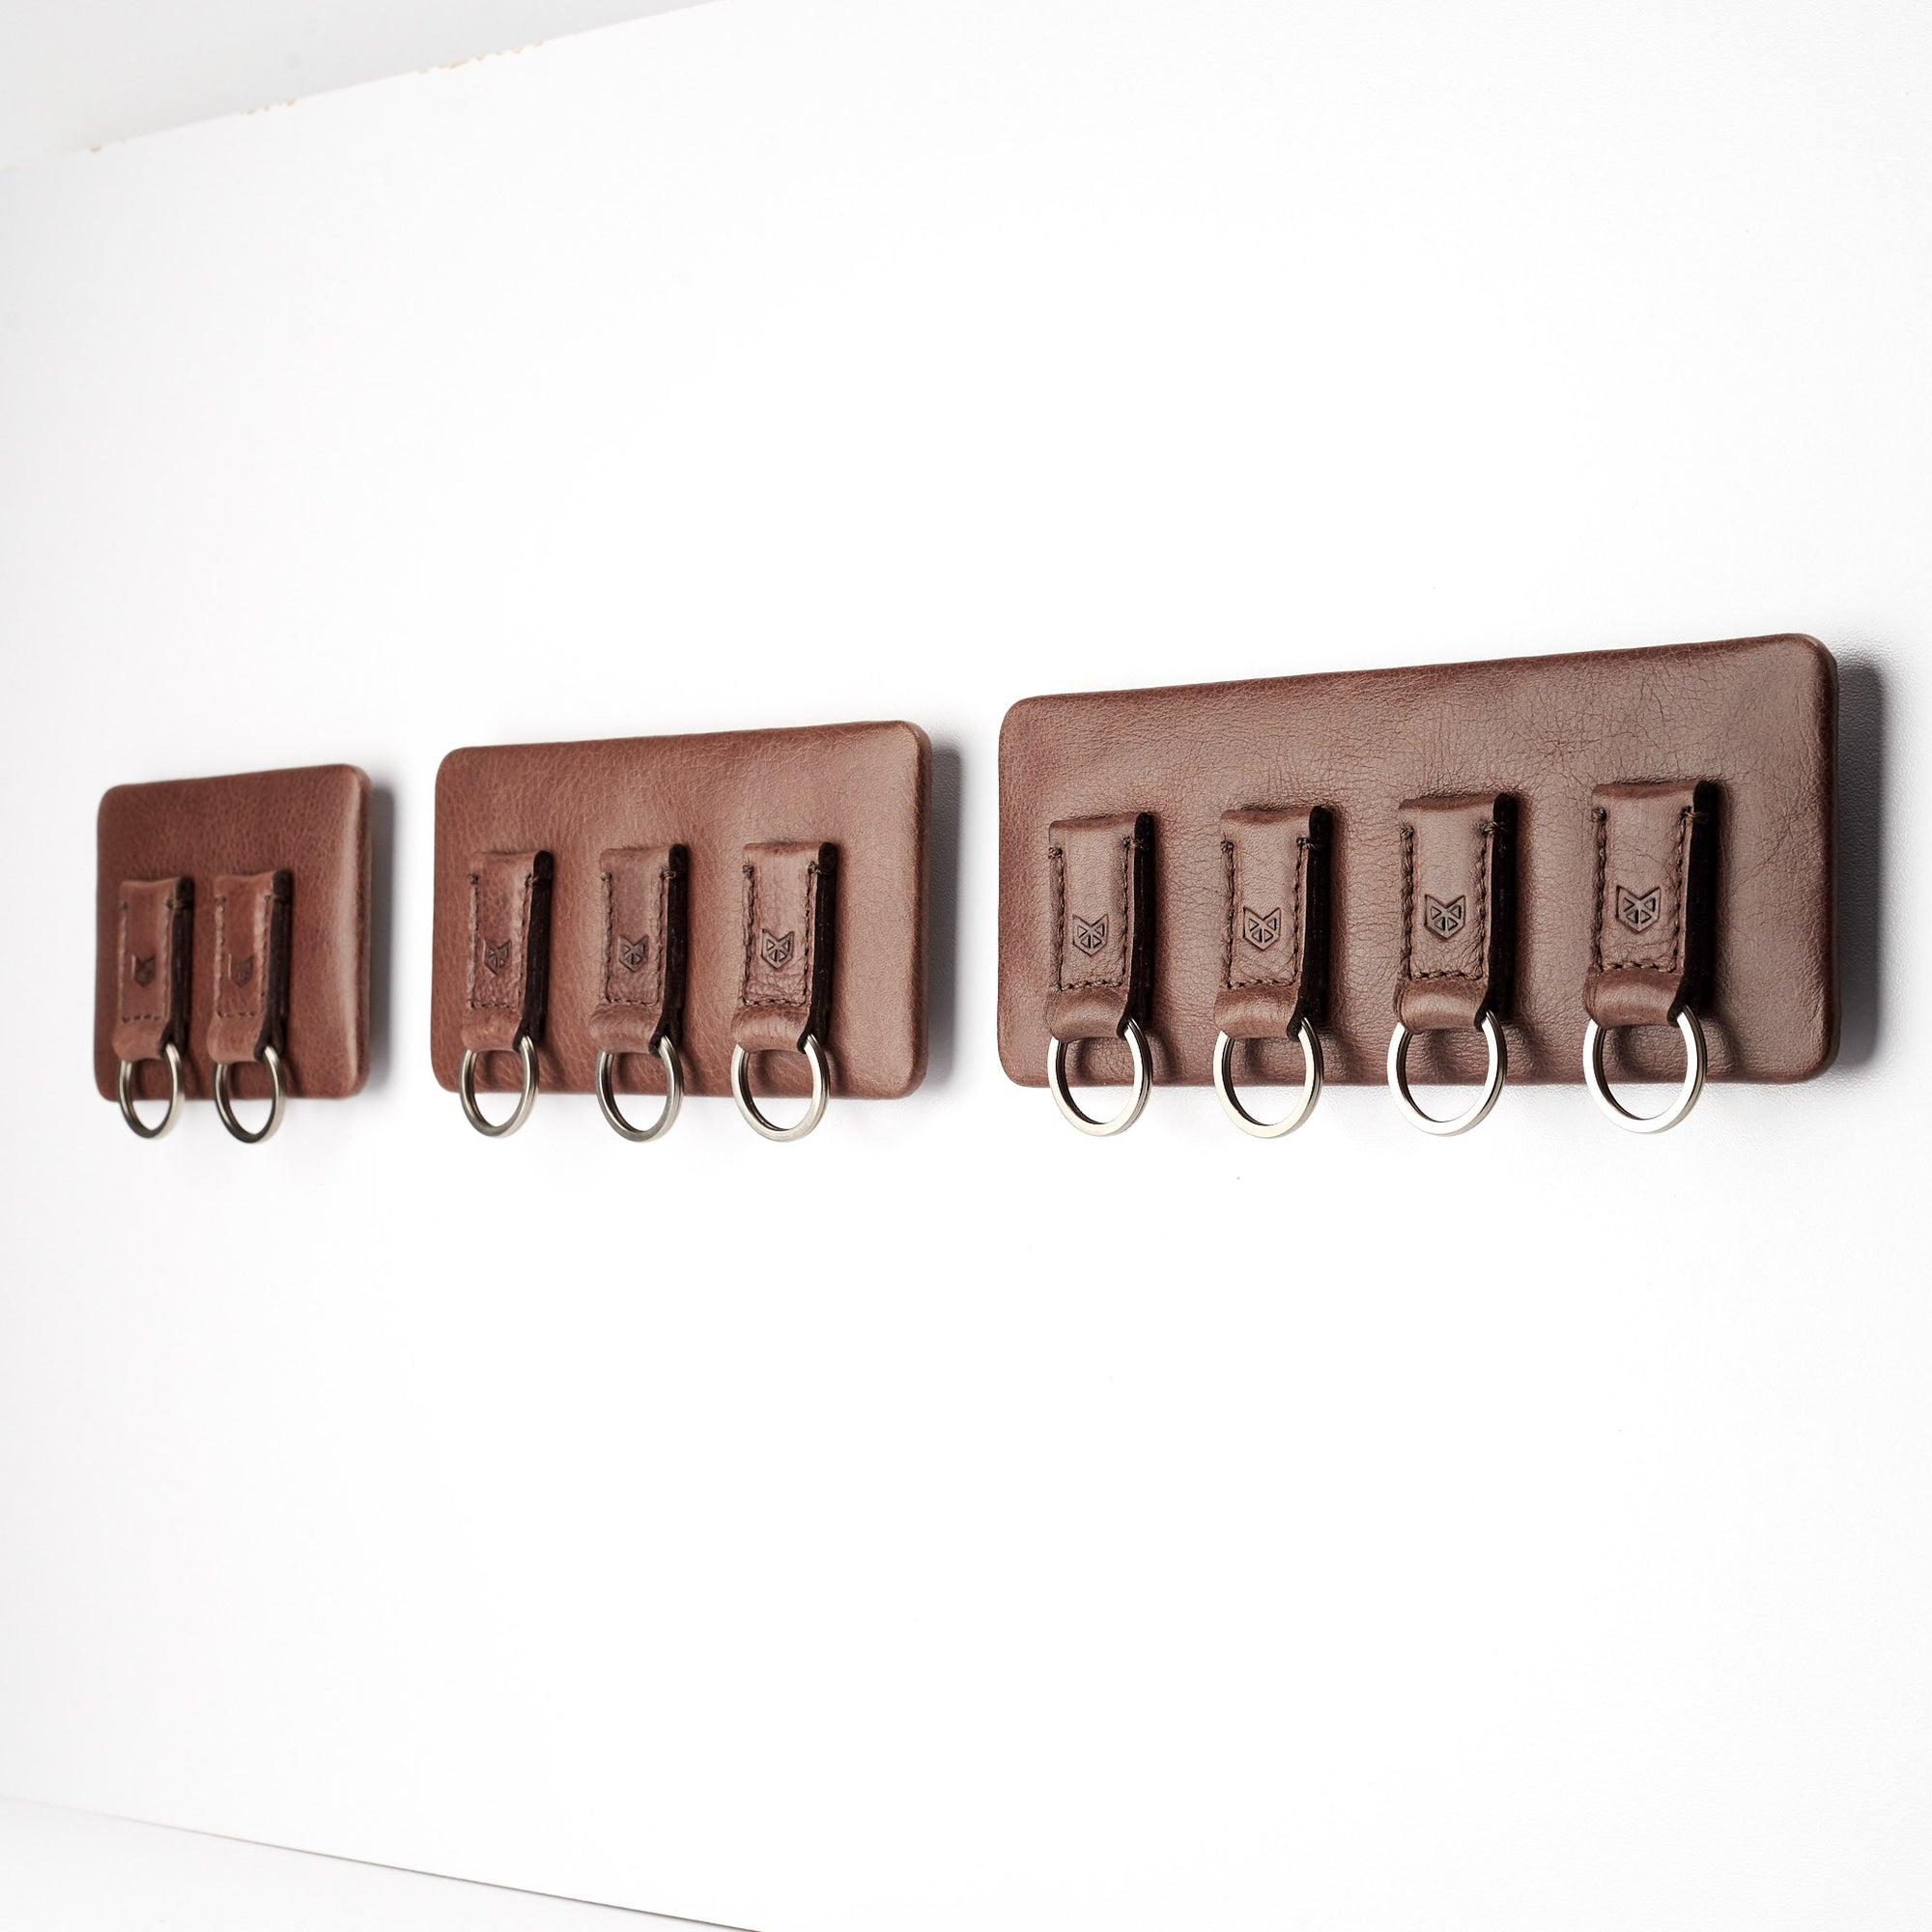 different sizes. Magnetic key hanger organizer. Brown leather magnetic key holder for wall decor. Entryway organizer decor. Home decoration. Keys organizer